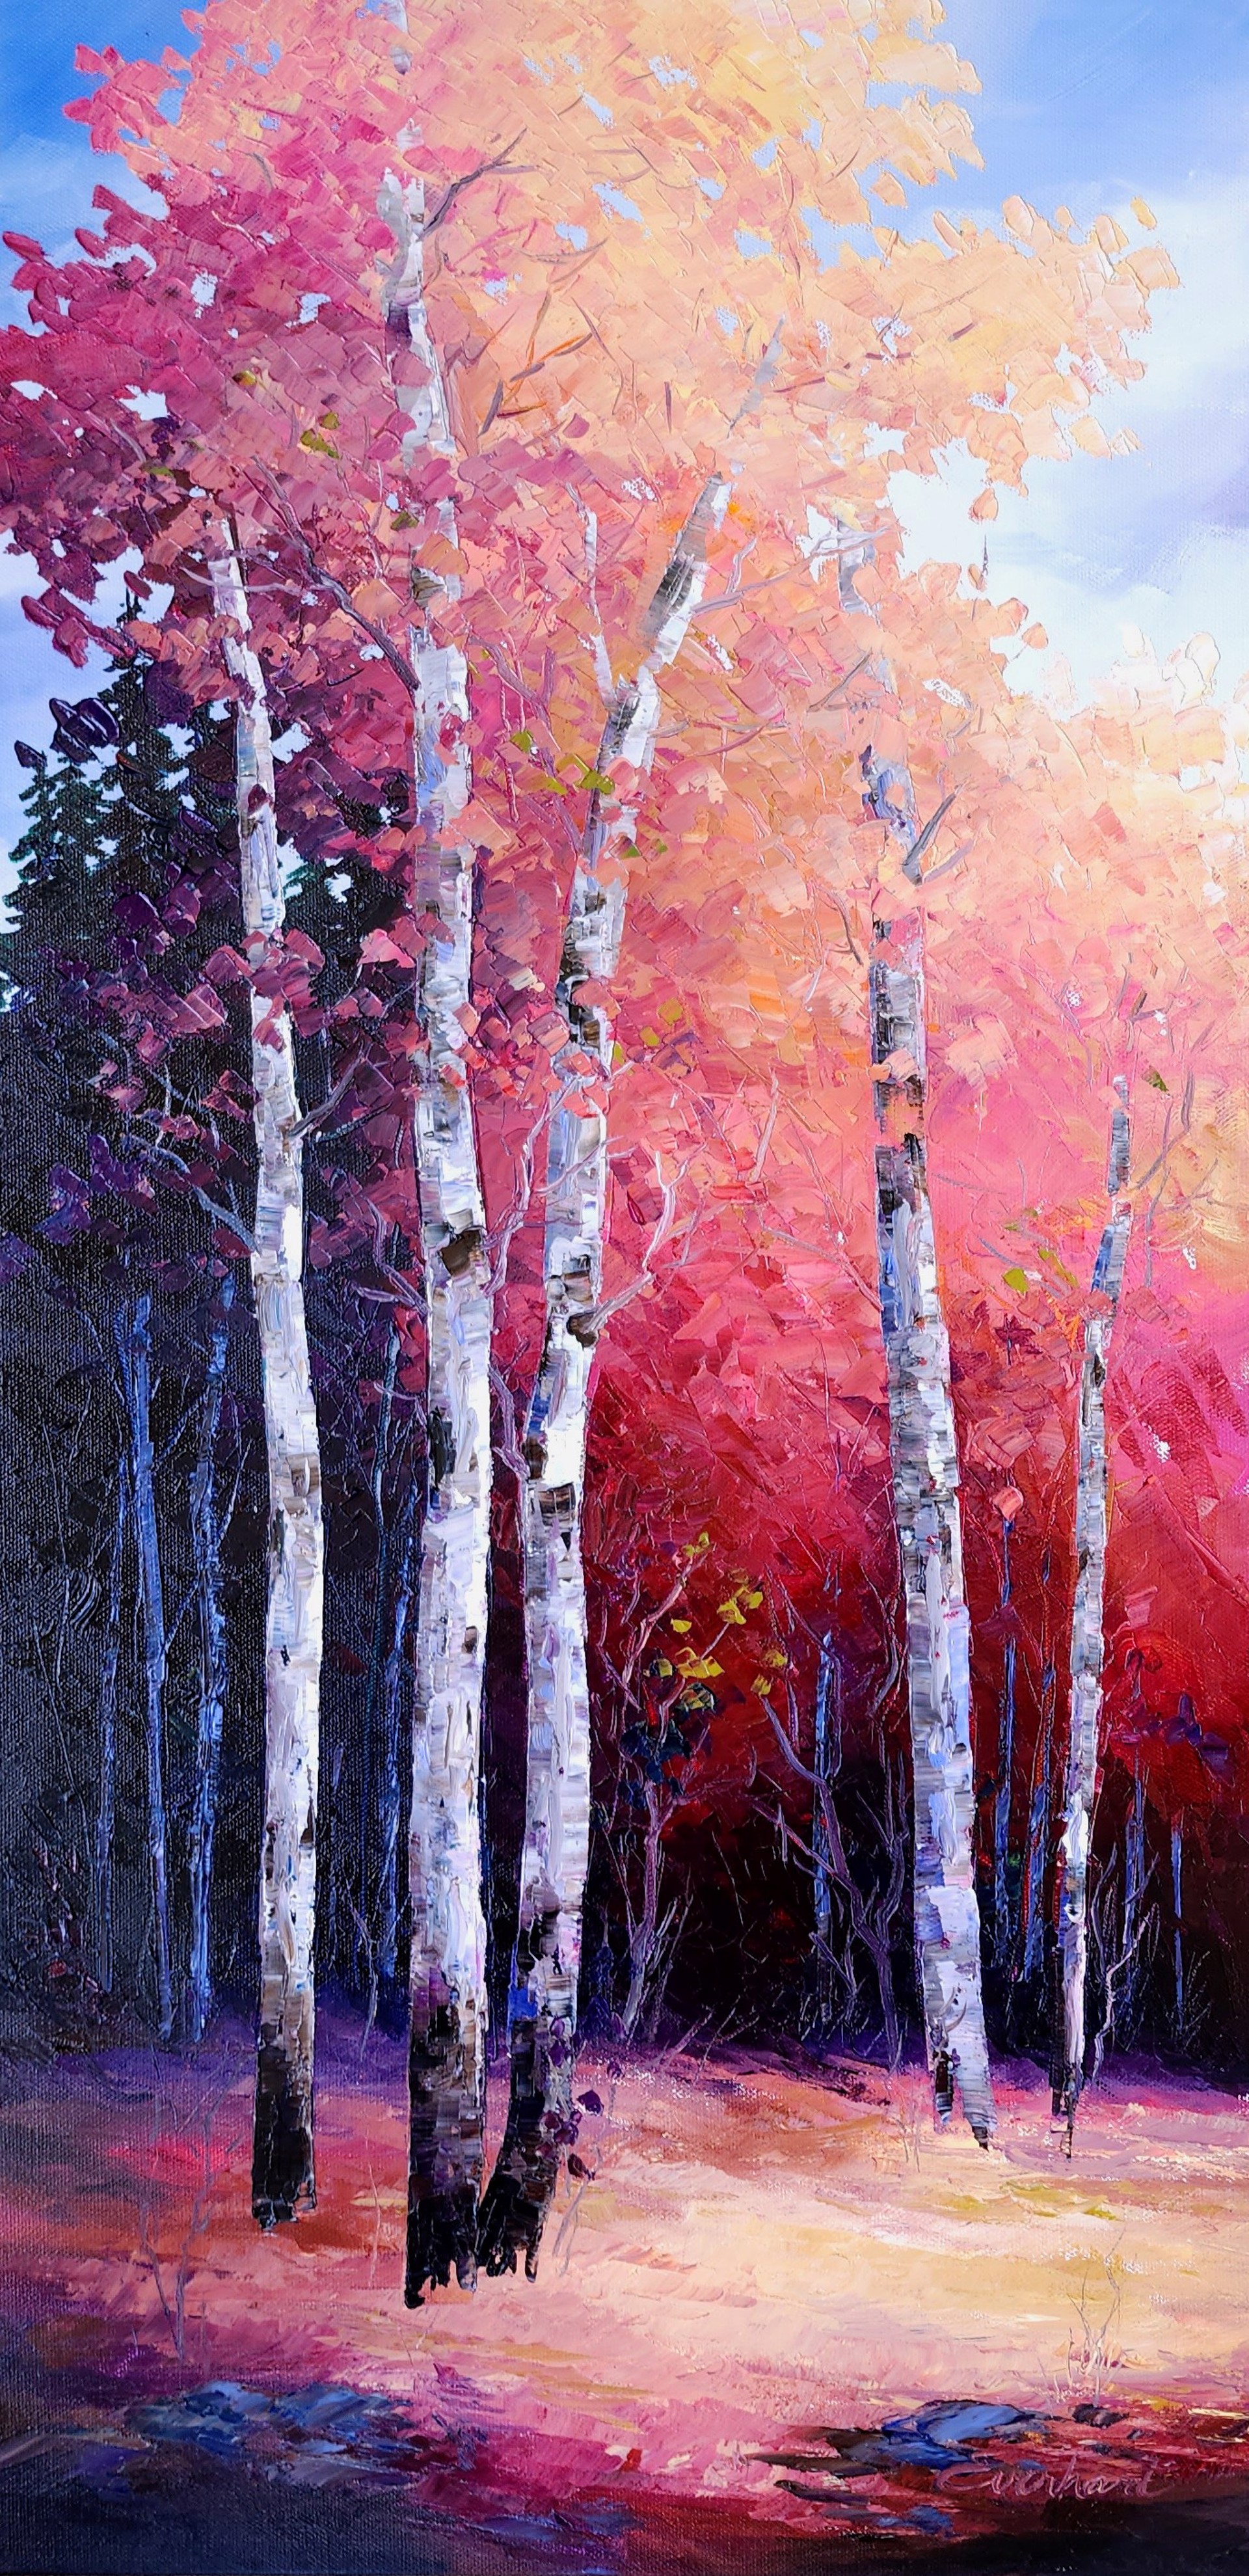 Rainbow in the Forest by Amy Everhart